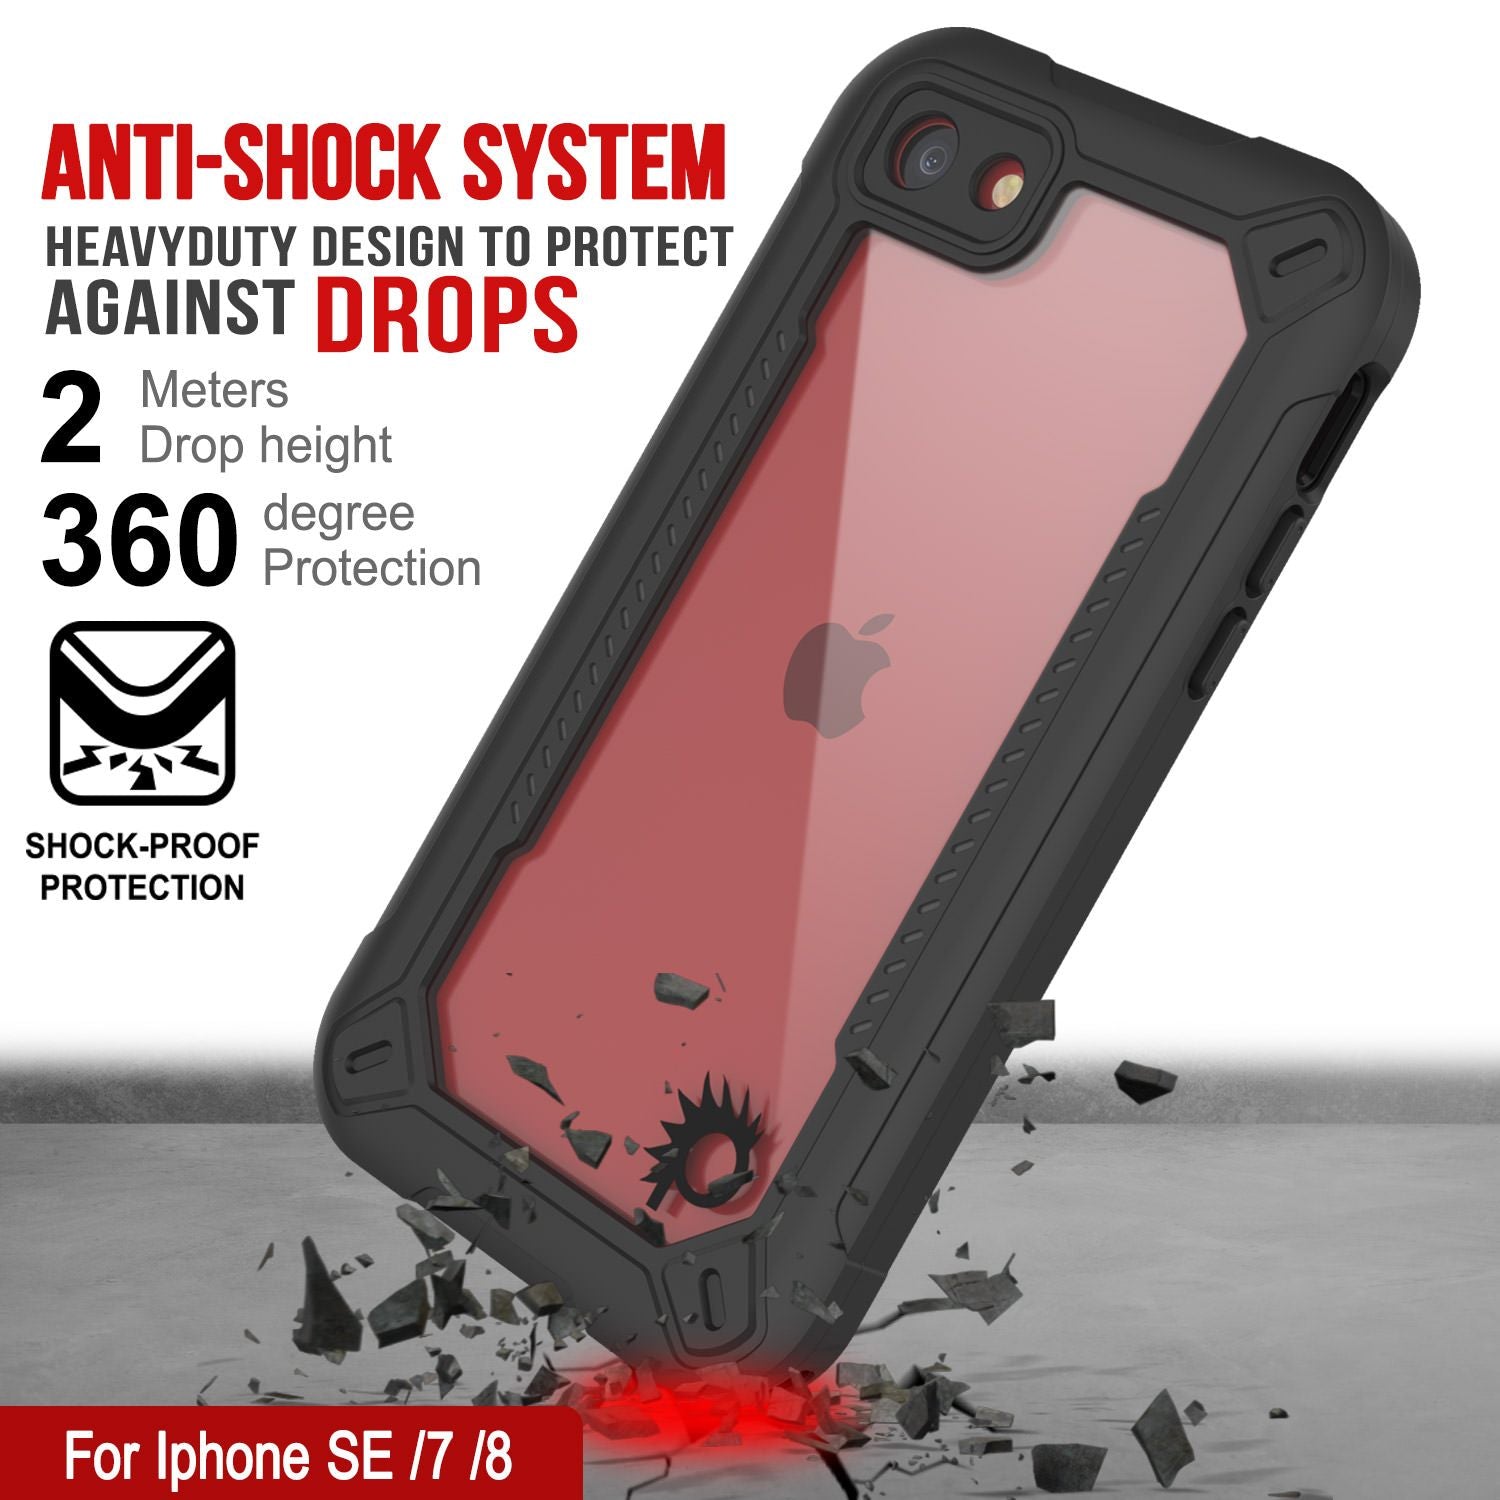 iPhone SE (4.7") Waterproof IP68 Case, Punkcase [Black]  [Maximus Series] [Slim Fit] [IP68 Certified] [Shockresistant] Clear Armor Cover with Screen Protector | Ultimate Protection